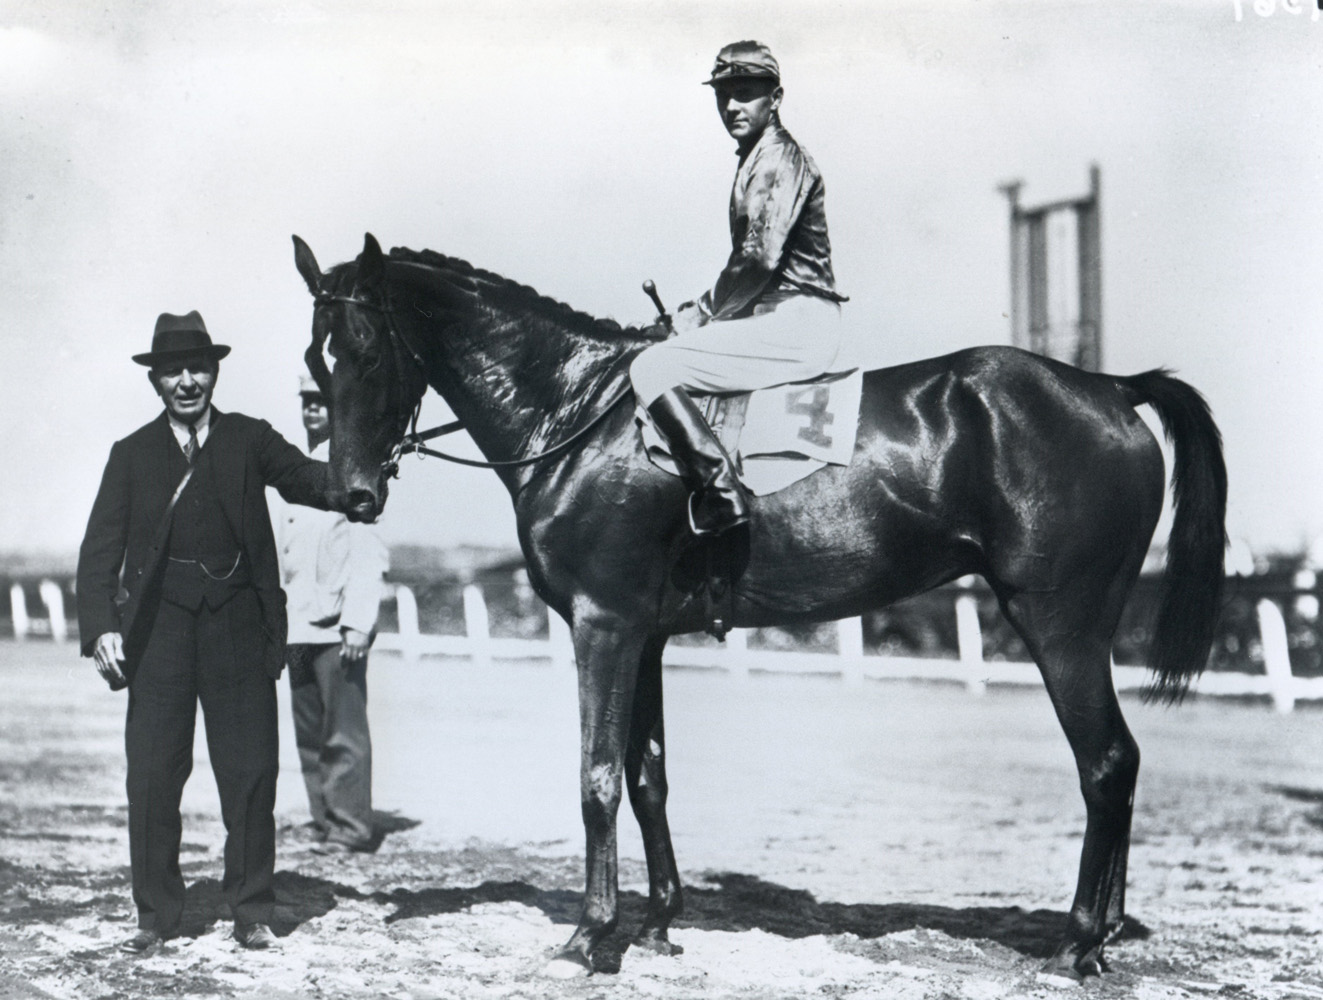 George Bostwick with trainer Thomas Hitchcock after winnning the 1930 Bushwick Steeplechase at Aqueduct with Actor (Keeneland Library Cook Collection/Museum Collection)